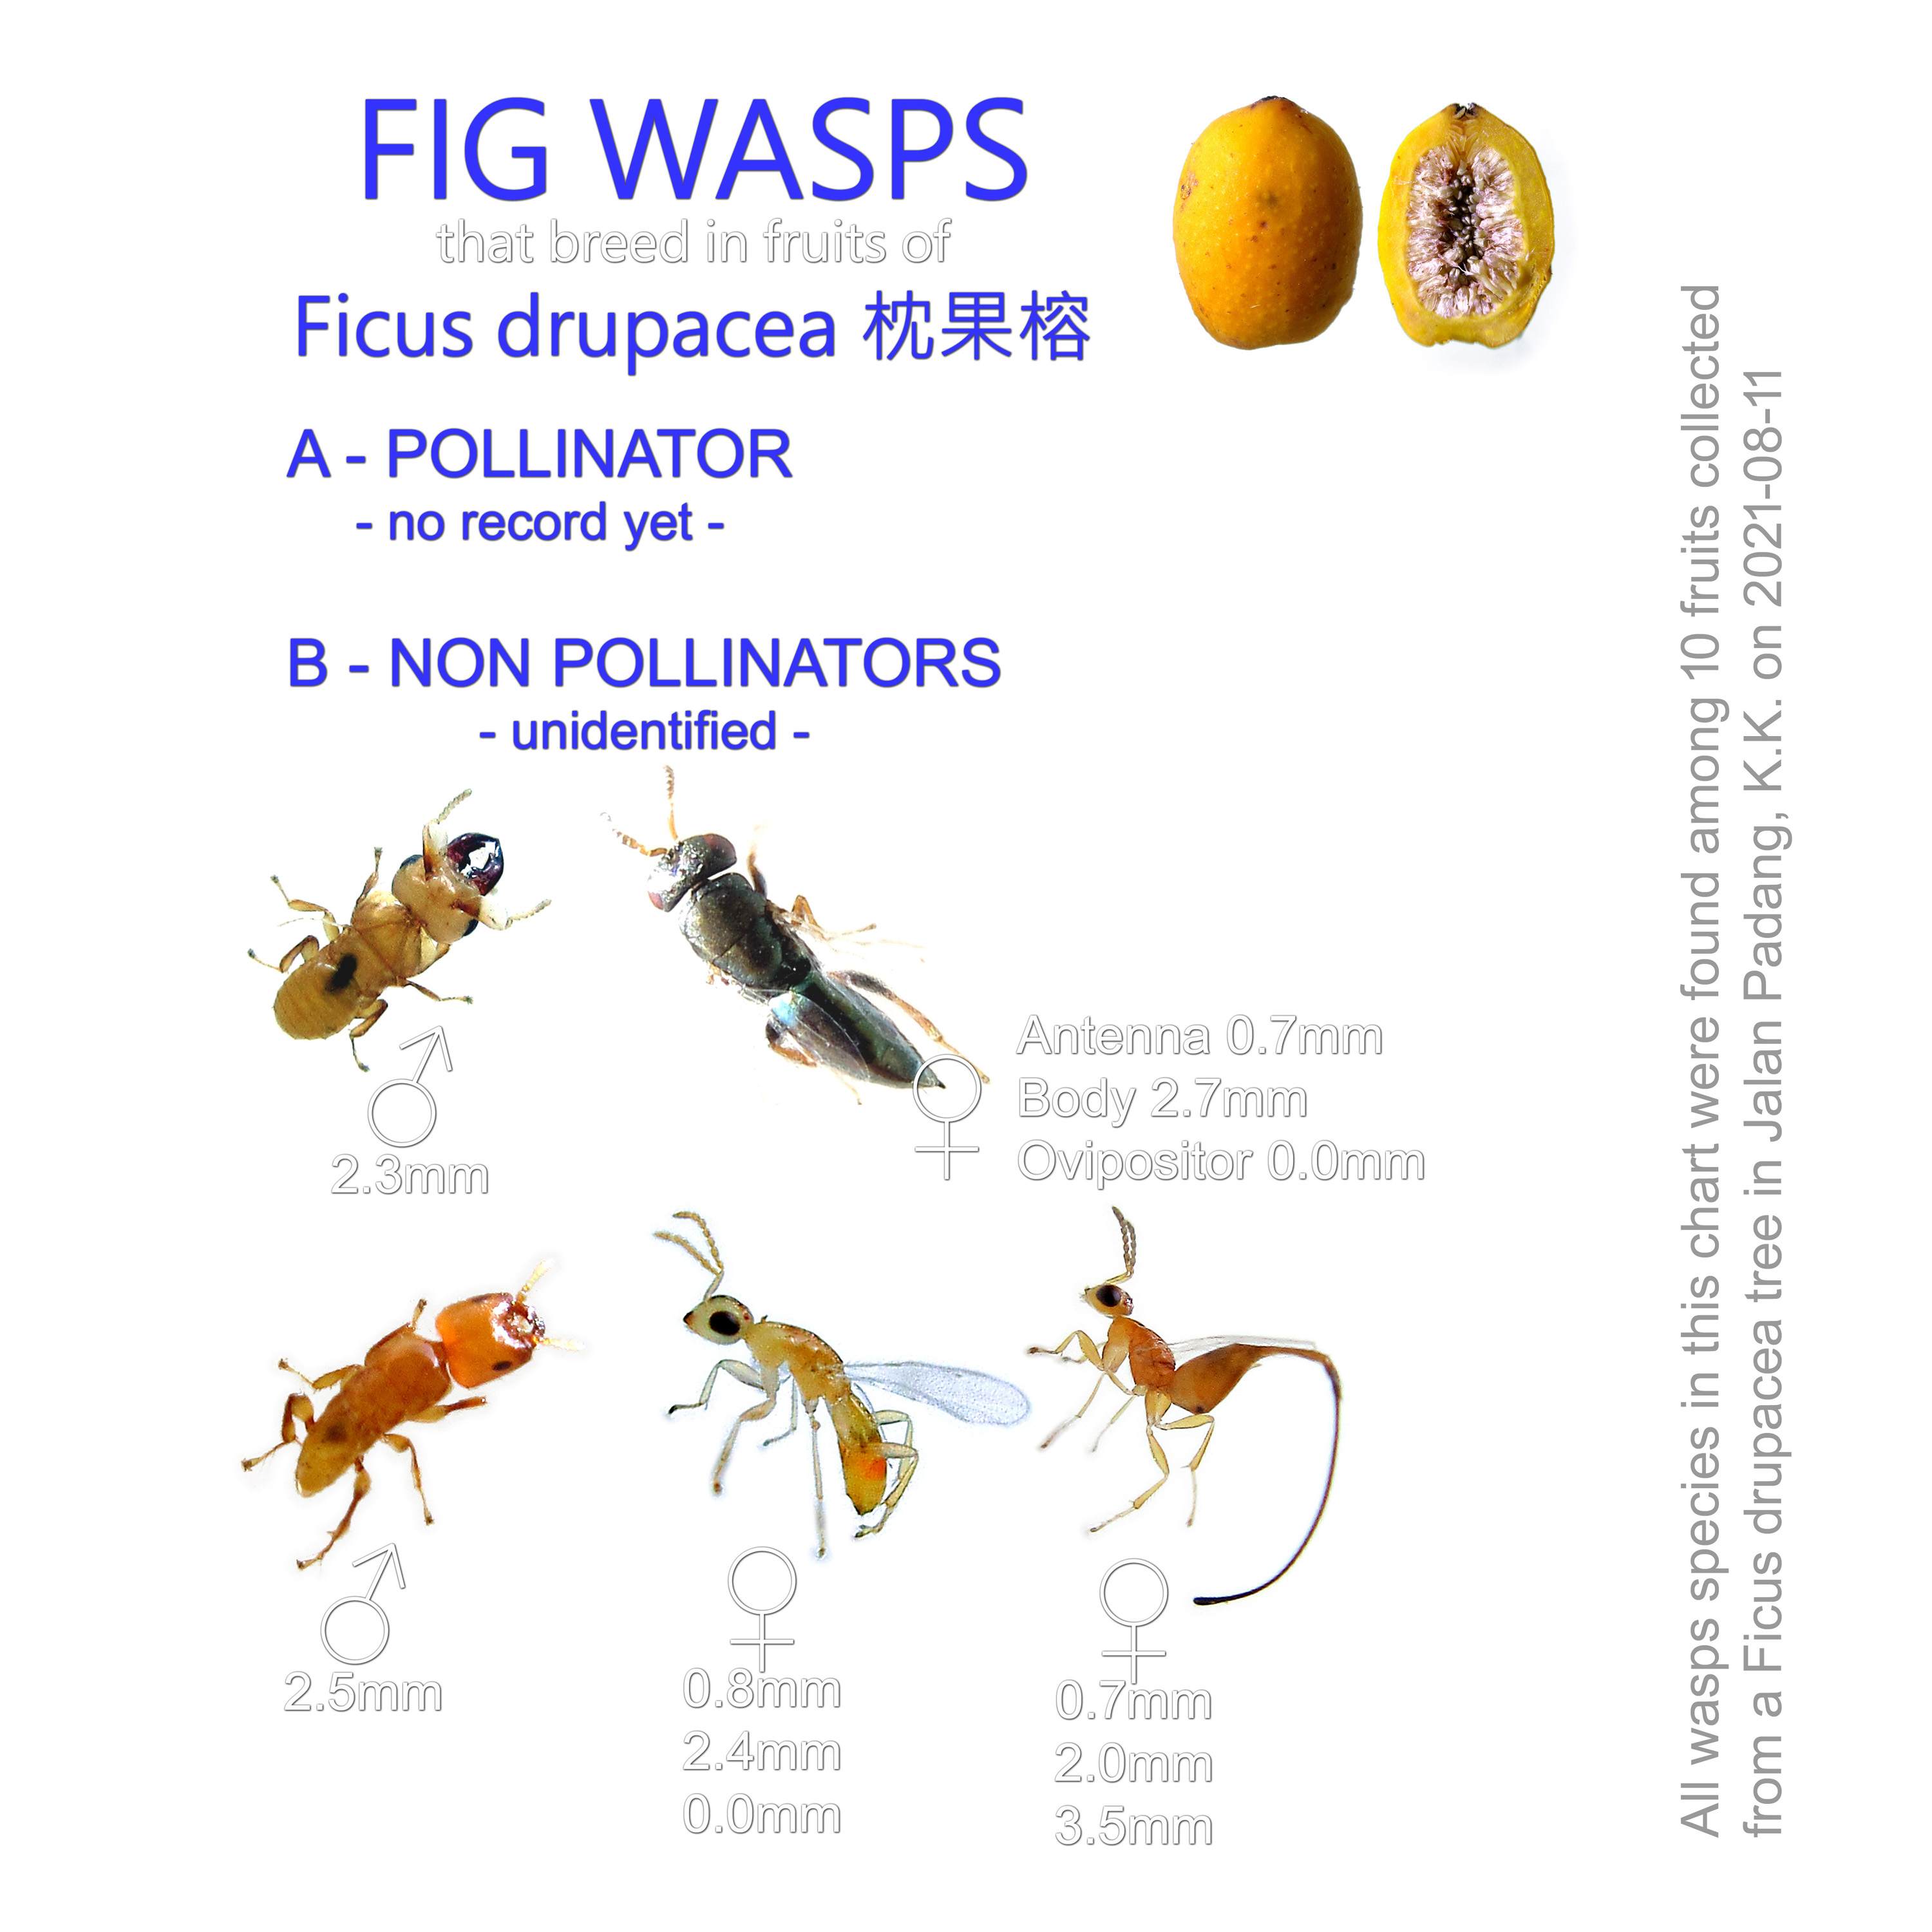 FIG WASPS that breed in fruits of Ficus drupacea 枕果榕